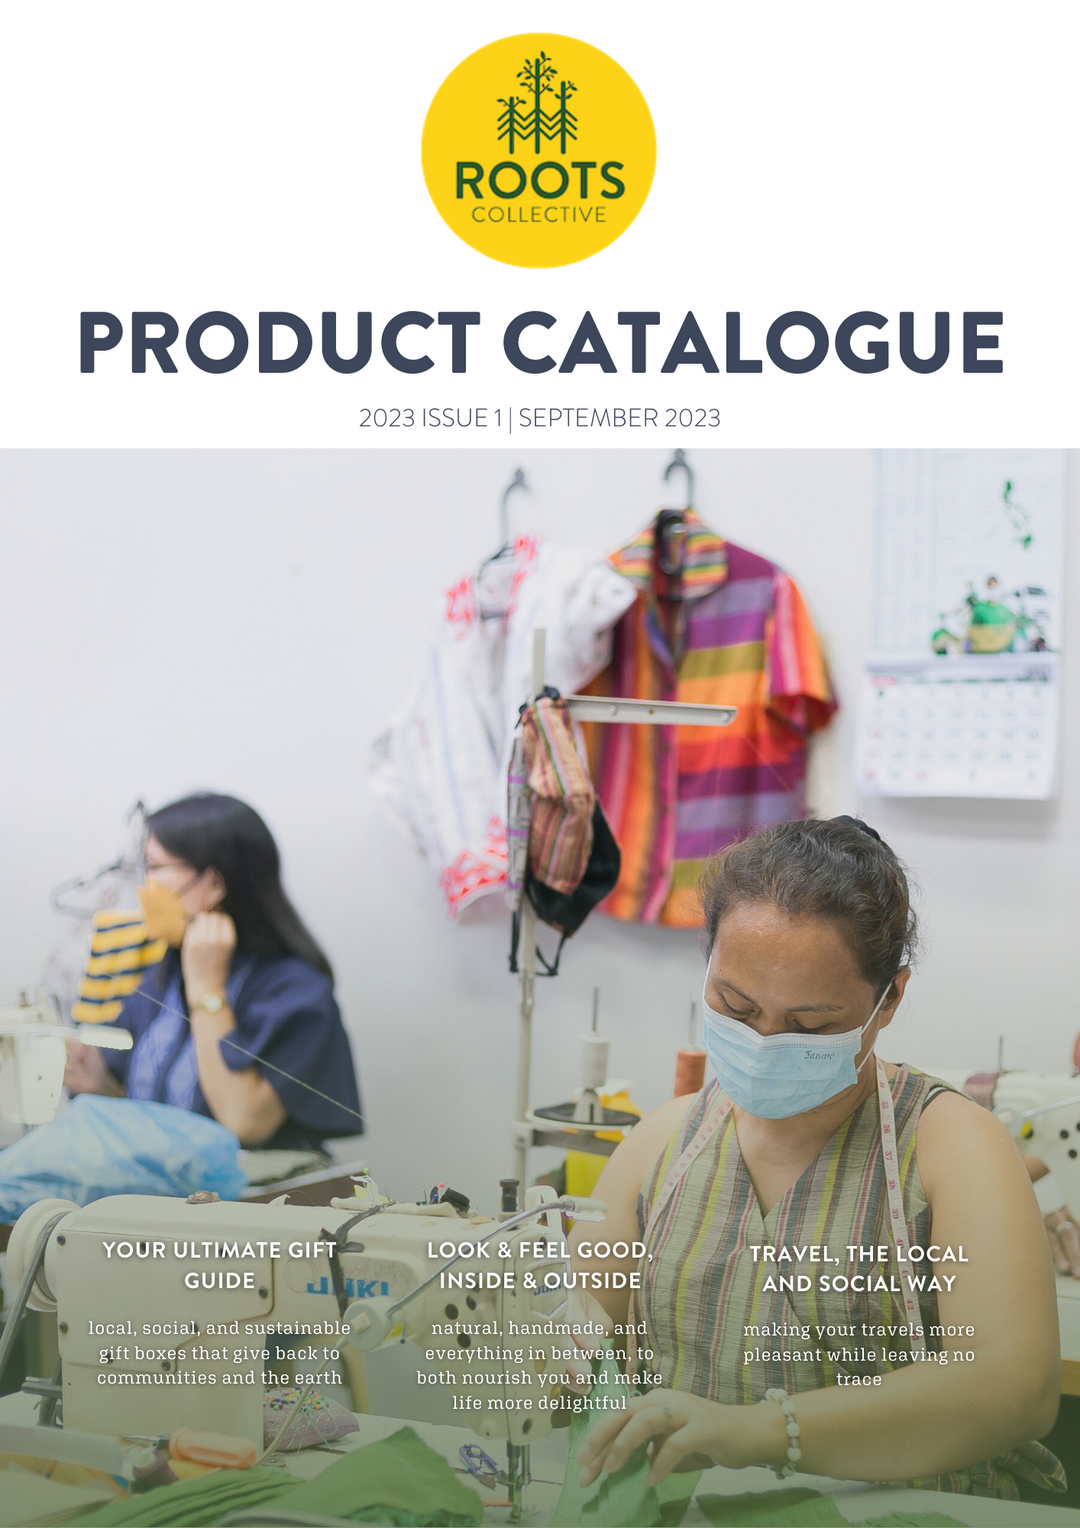 Roots Collective Product Catalogue • 2023 Issue 1